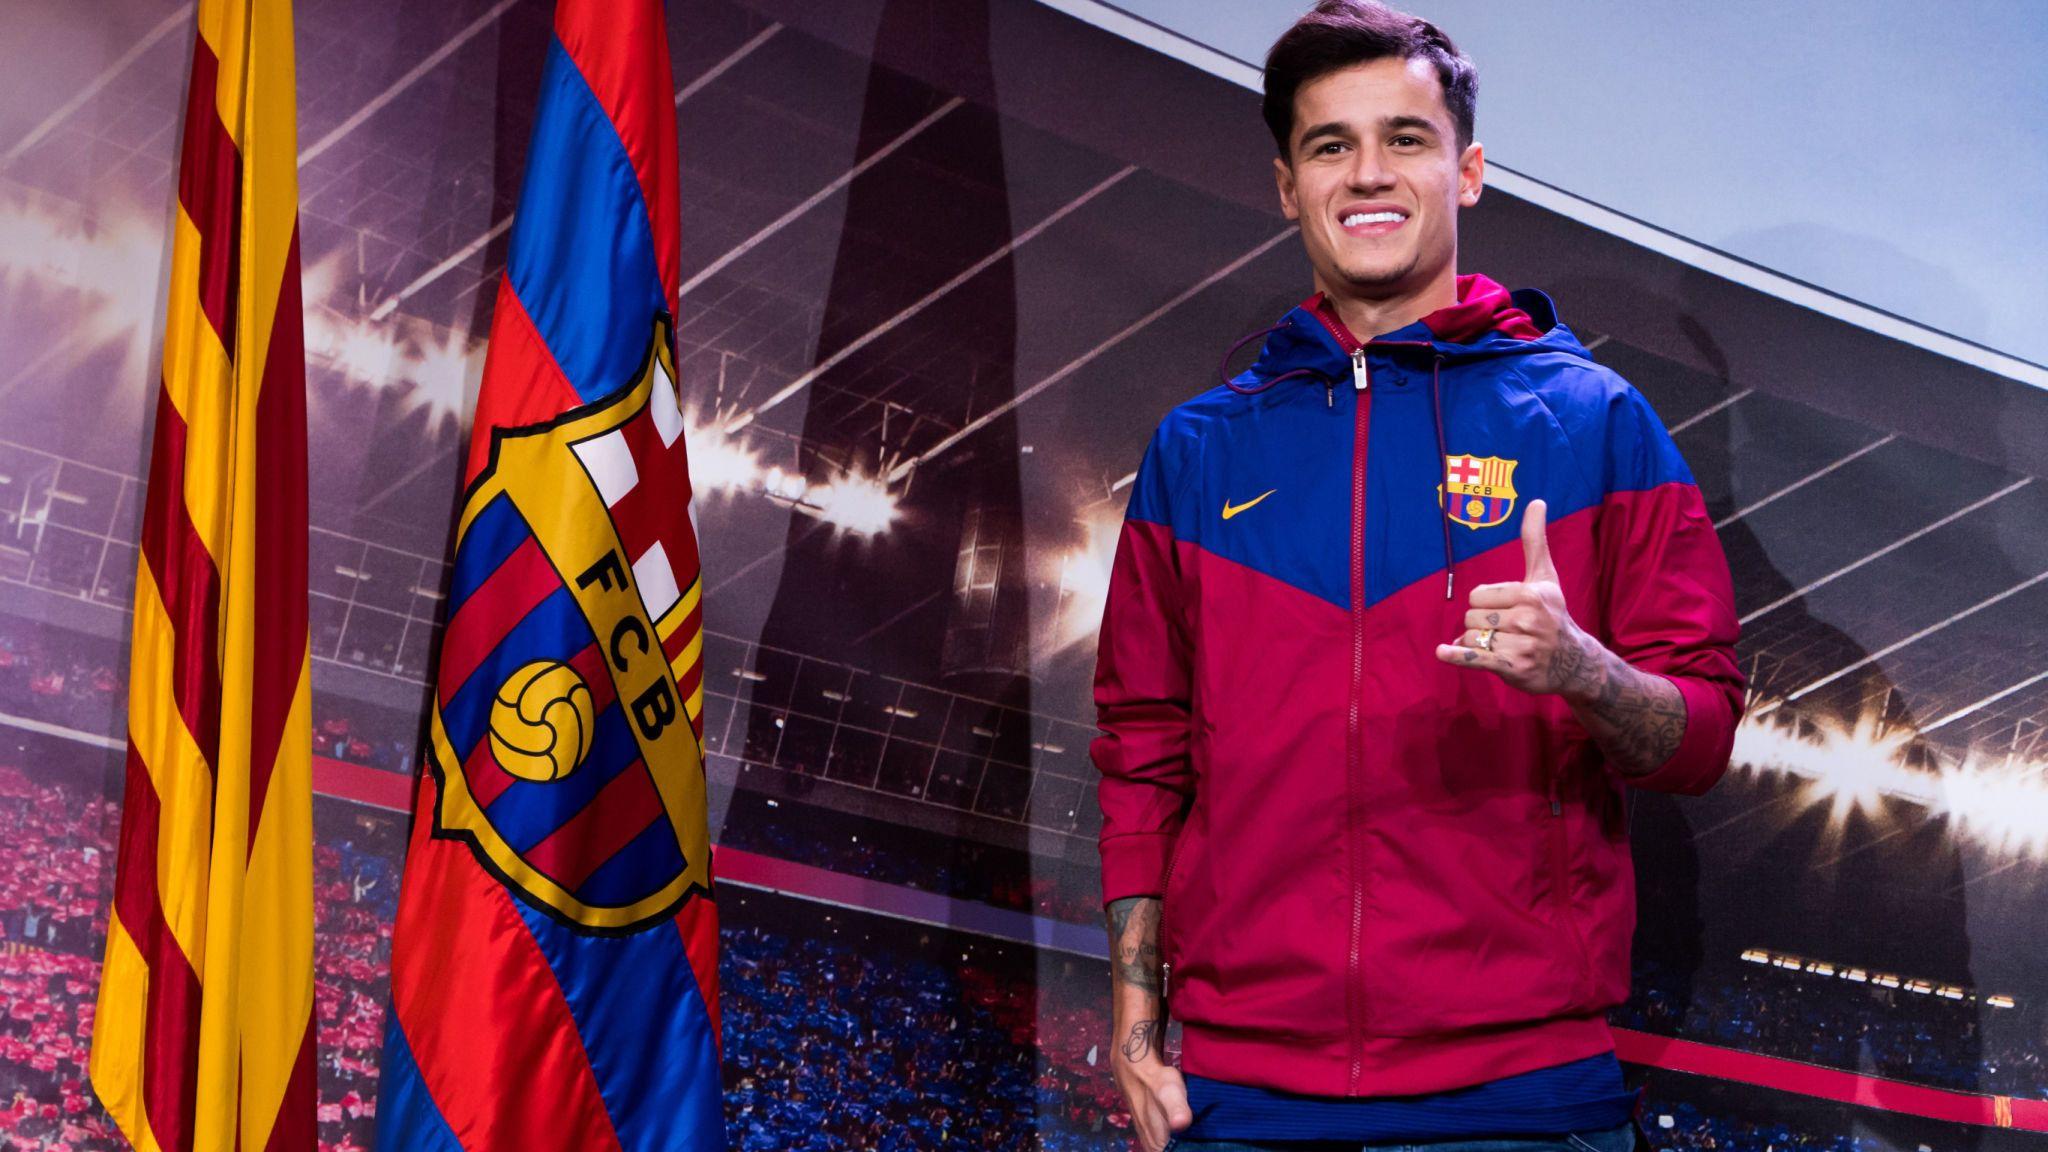 Philippe Coutinho excited to play alongside 'idols' as Barcelona